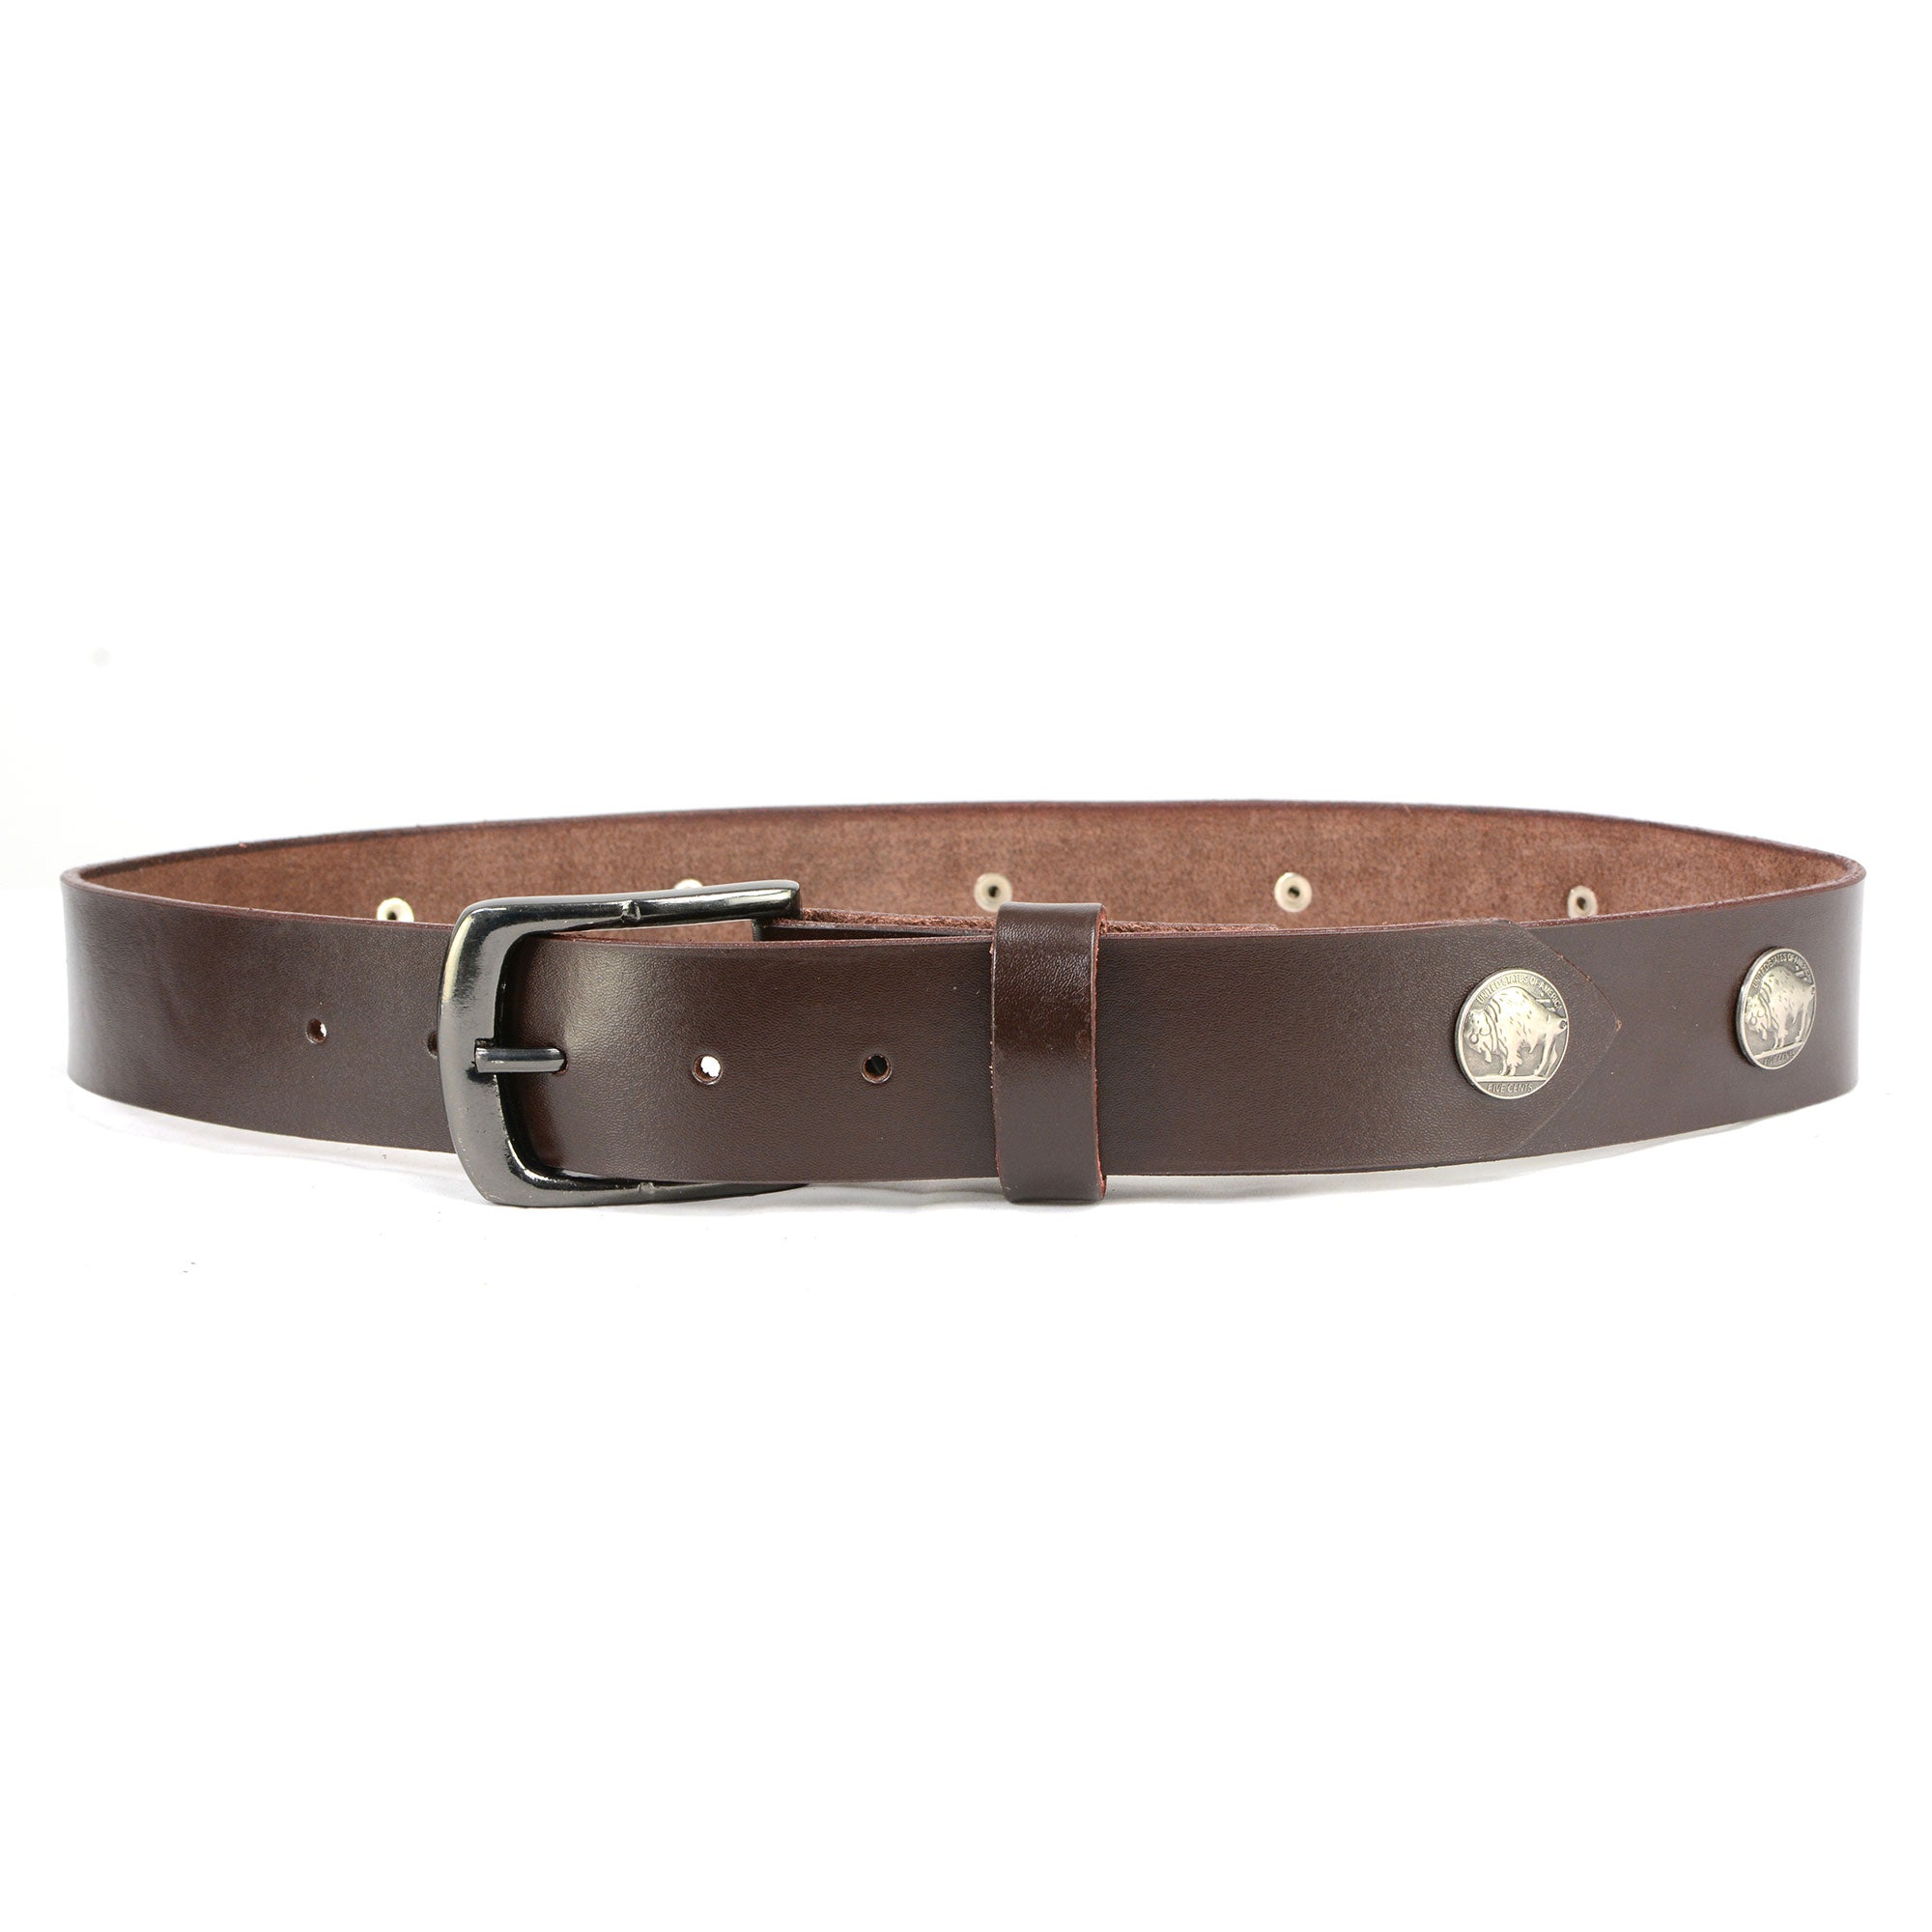 Hot Leathers Buffalo Nickel Brown Leather Belt